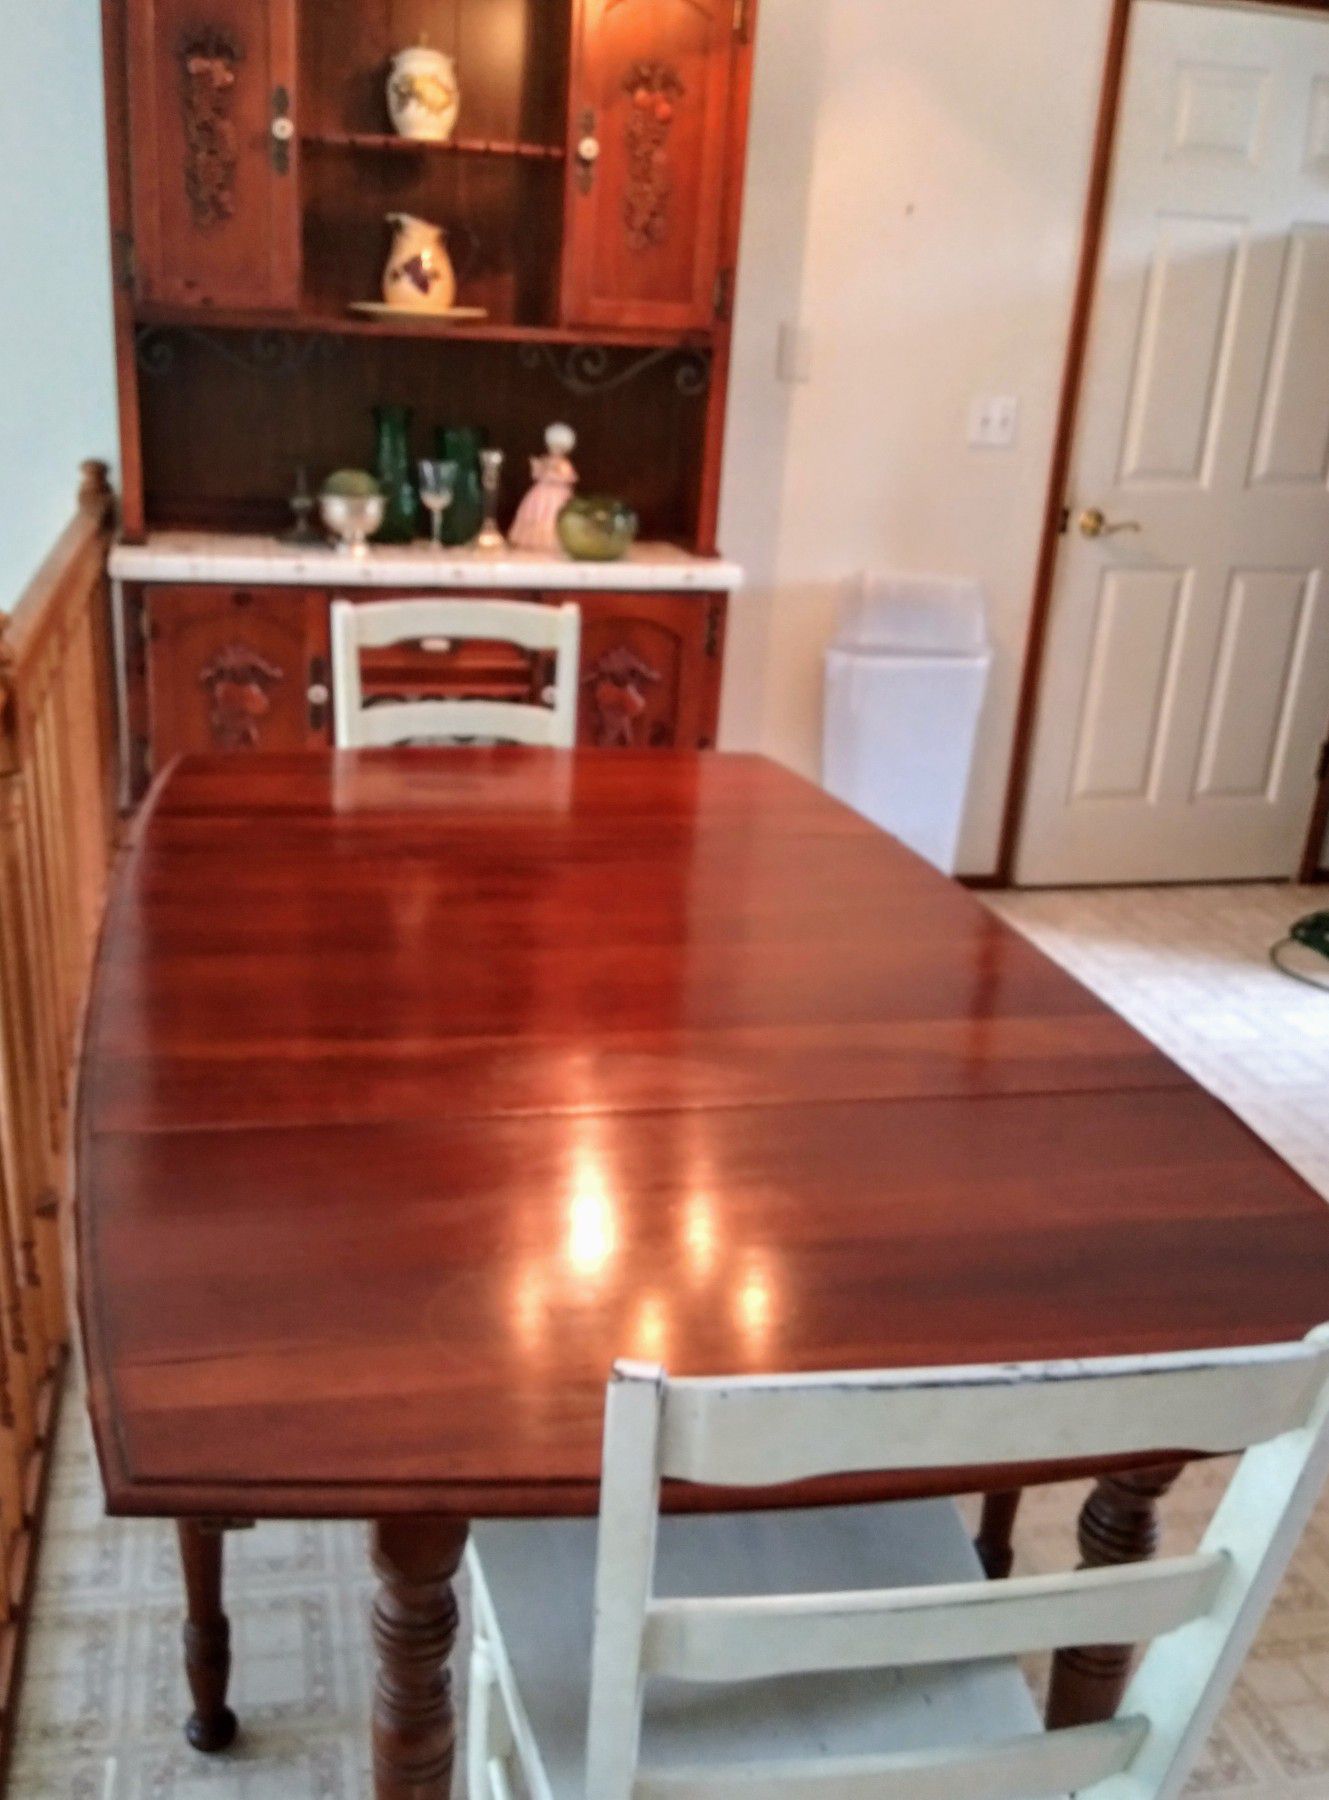 HOLIDAY SALE Gorgeous Mahogany DropLeaf Table $119 + 200 yr old Flame Mahogany Game Table, 2pc Buffet Cabinet w/ Wrought Iron Drawer Shelving + READ⏬️